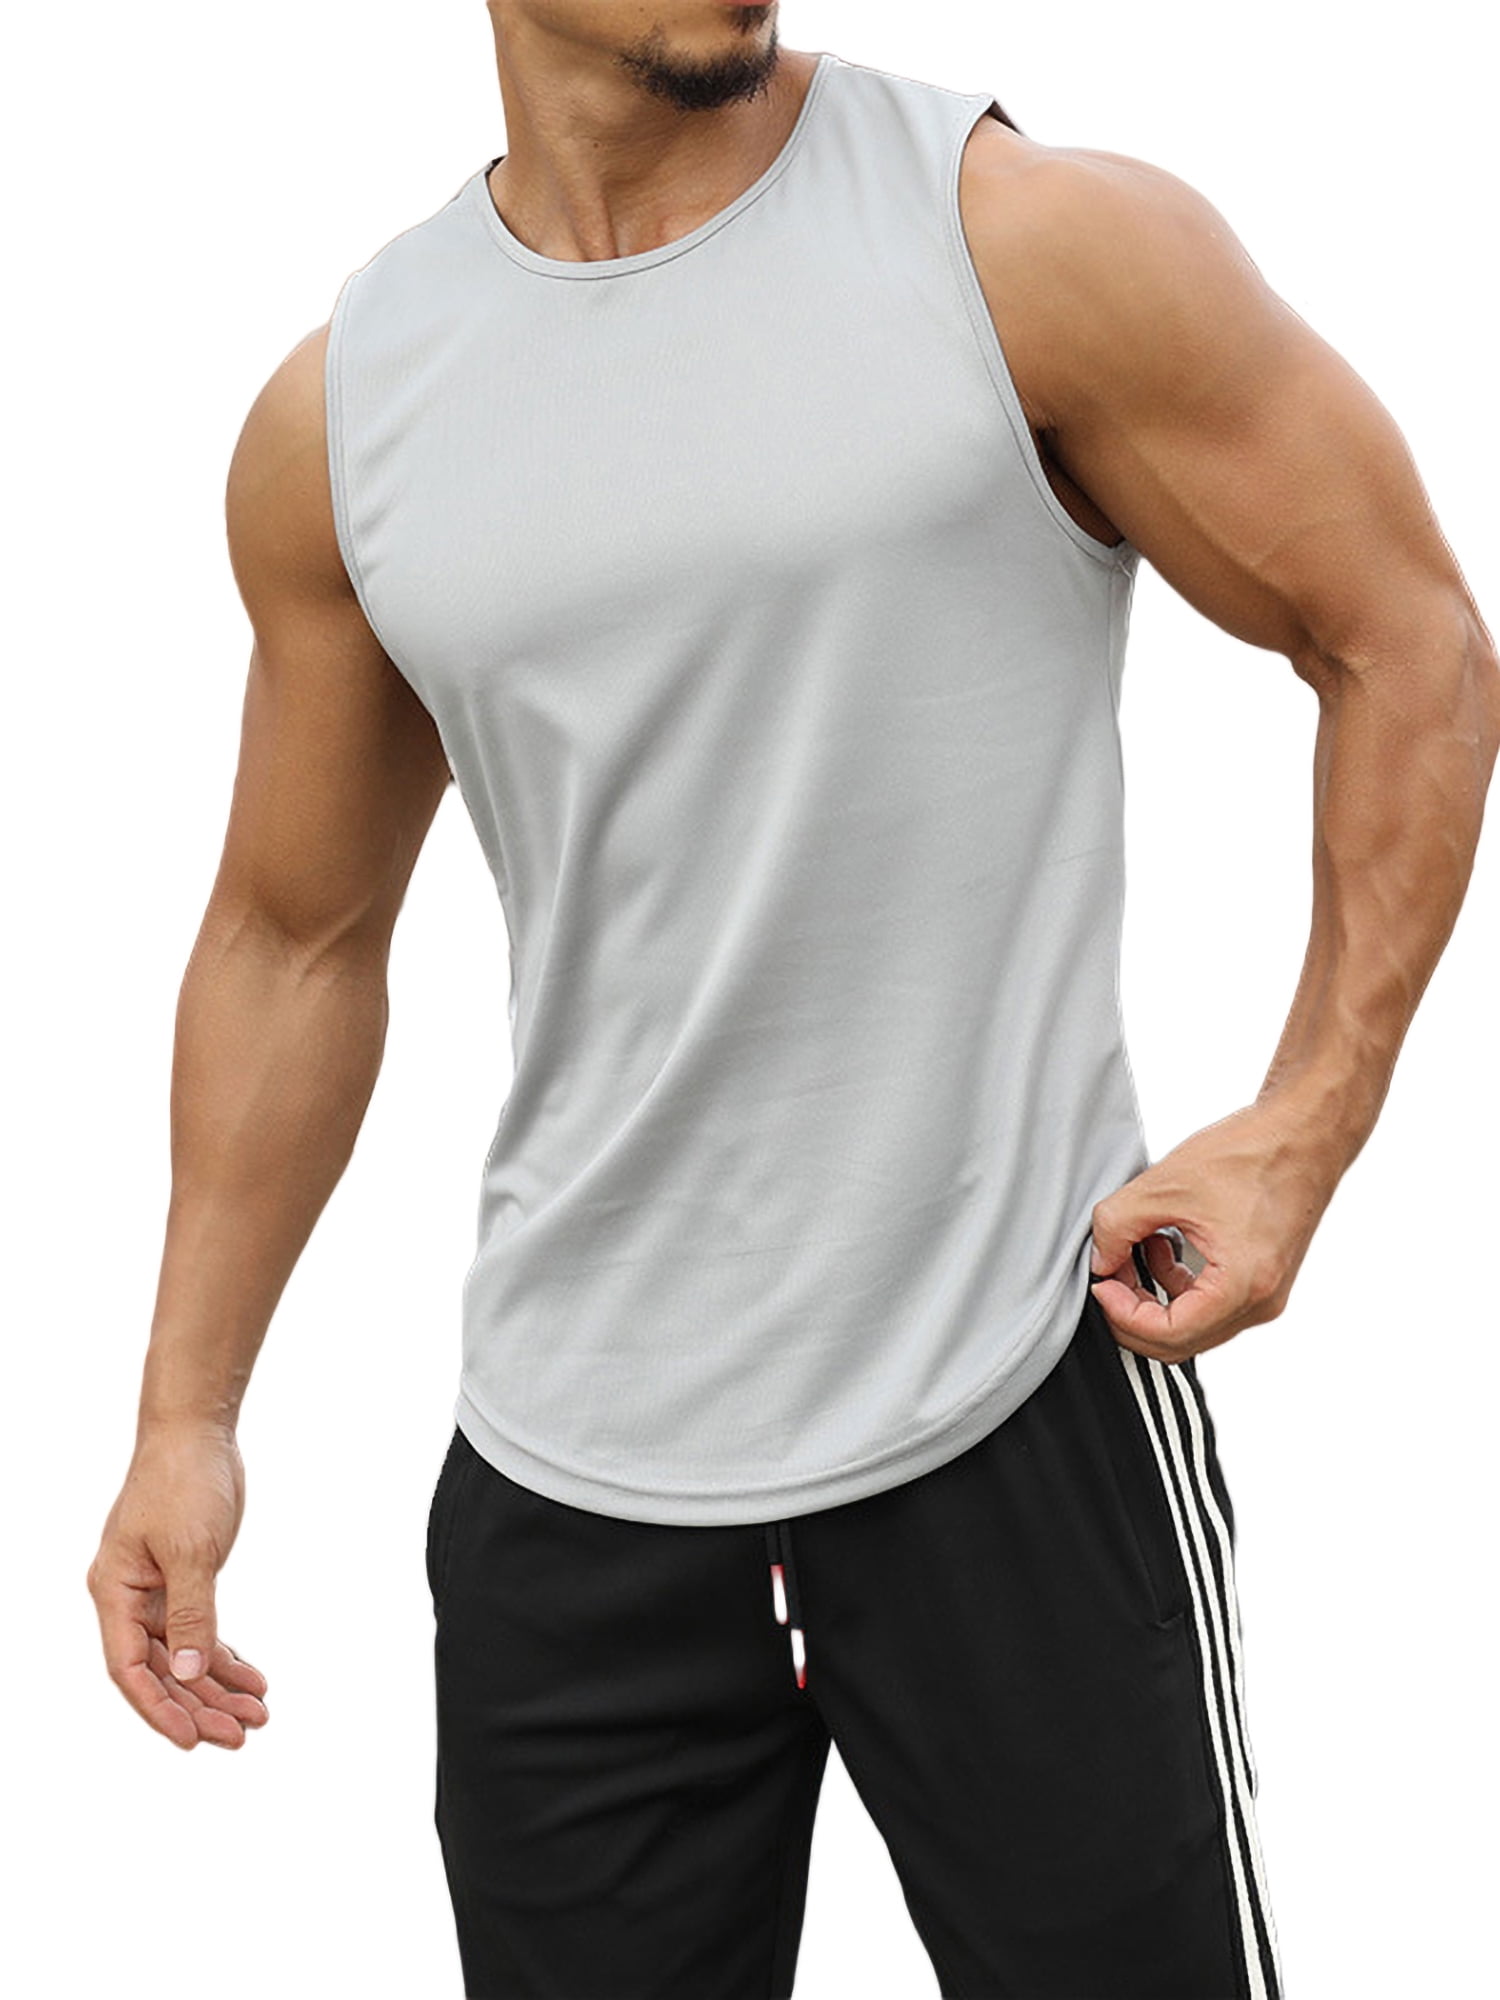 Mens Gym Workout Tank Tops Sleeveless Crew Neck T-Shirts Casual Tees Sports Bodybuilding Muscle Shirts 